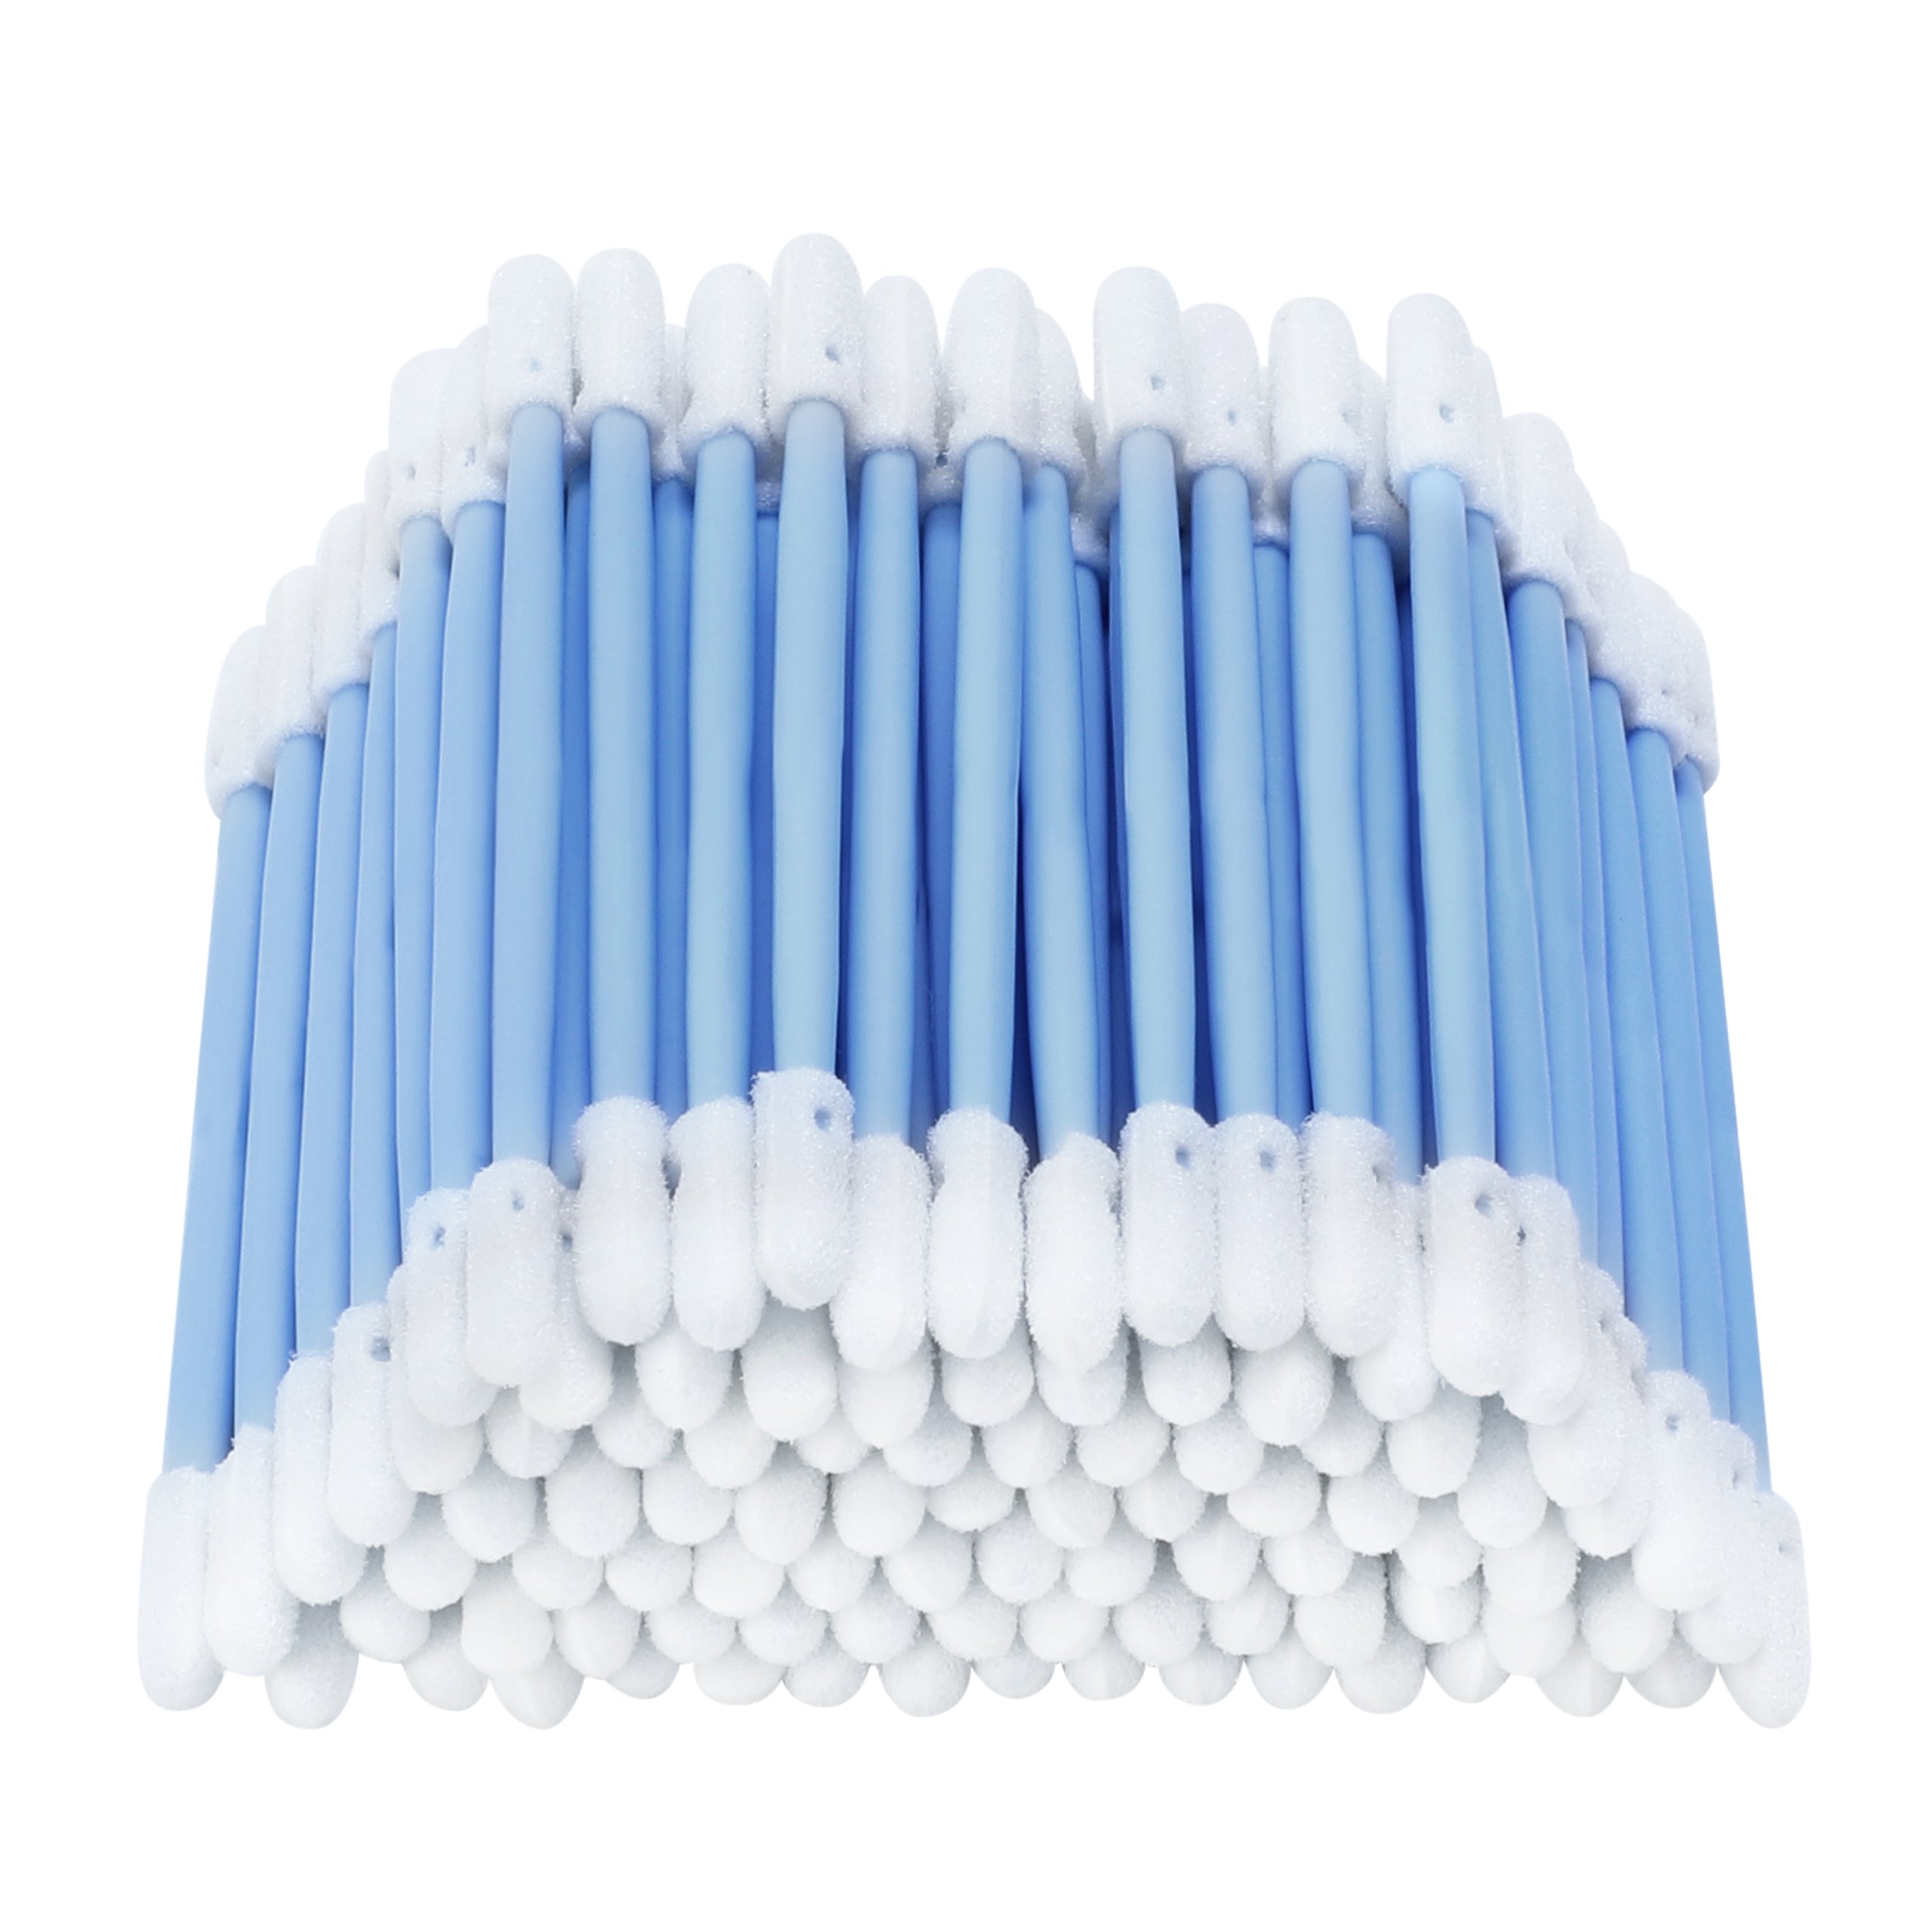 3" Double-Headed Q Tip Foam Swab Cleaning Sticks (1,000pcs, 3.2 mm Round Head, 76 mm Length), for Cleaning Tiny Grooved Areas (D7220)